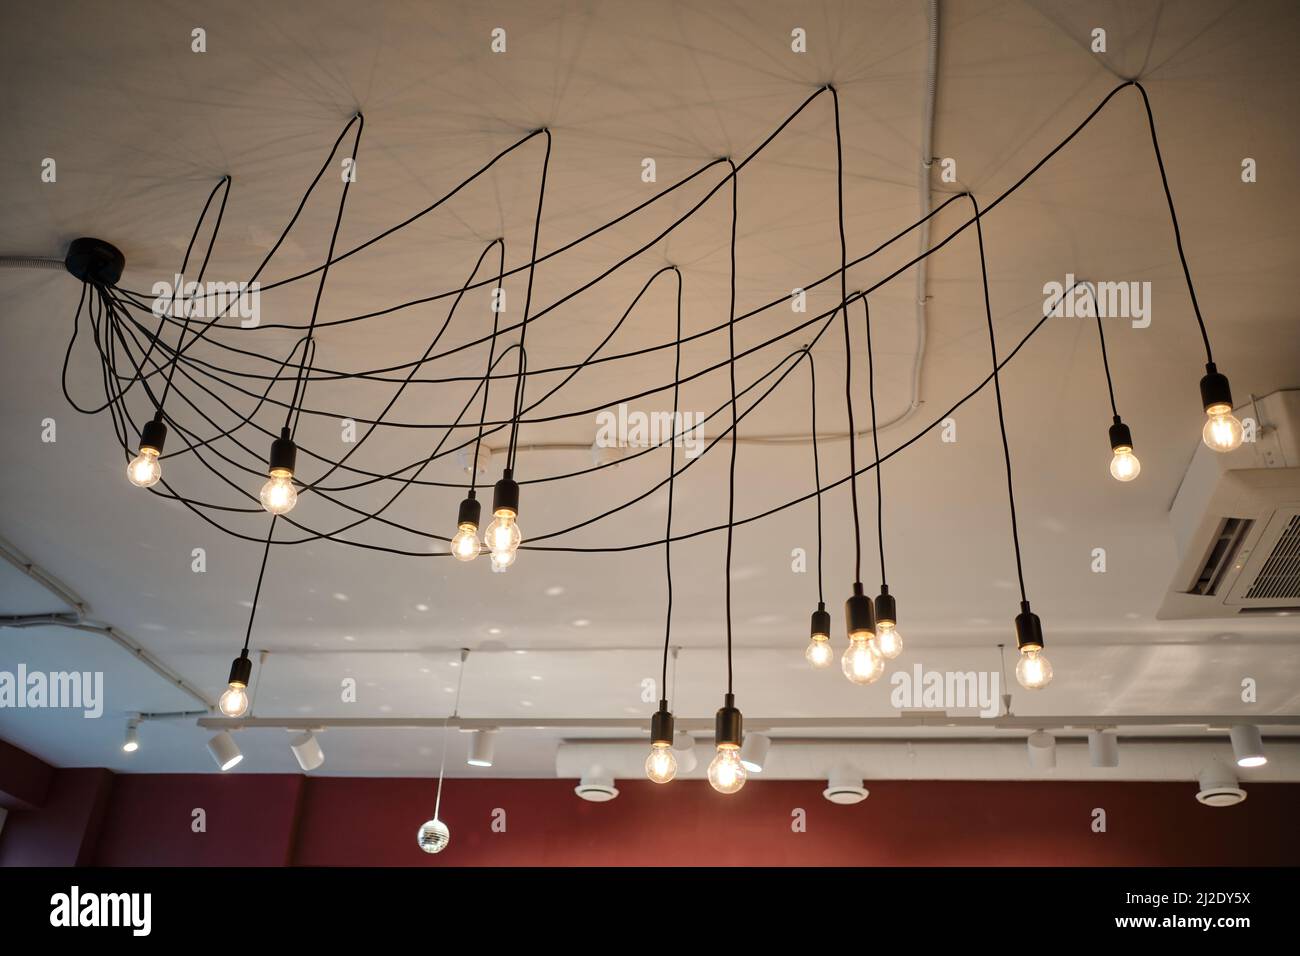 Unusual chandelier with individual light bulbs adorns ceiling in cozy cafe. Lamps illuminate large room and create interesting effect. Stock Photo